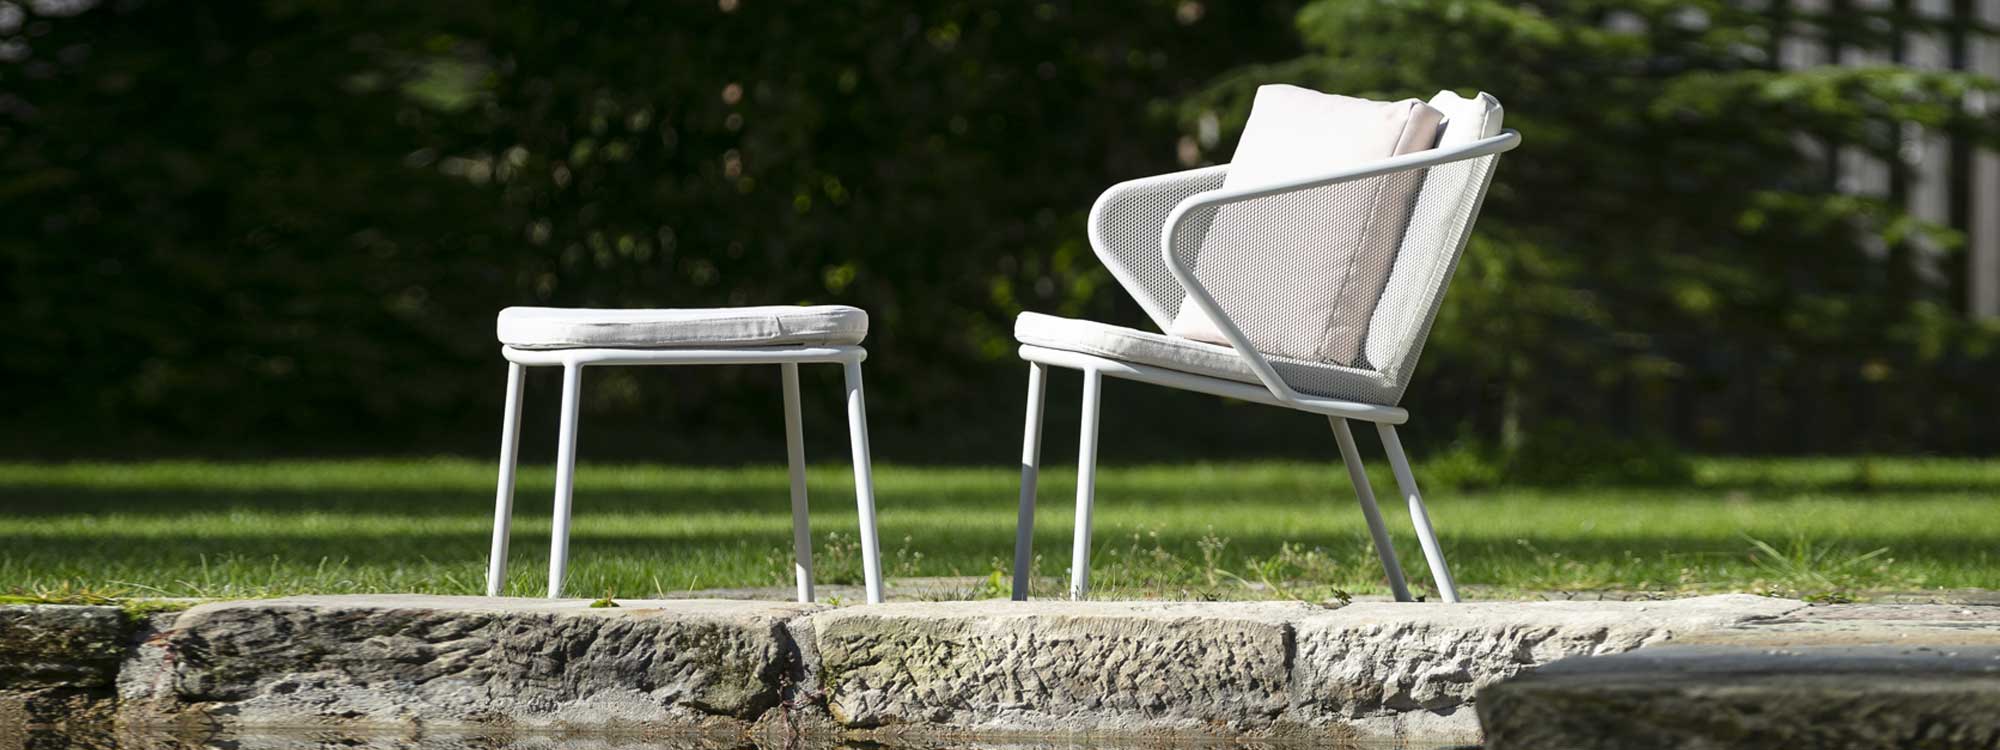 Condor modern outdoor lounge chair is a garden relax chair in high quality outdoor furniture materials by Todus luxury garden furniture.